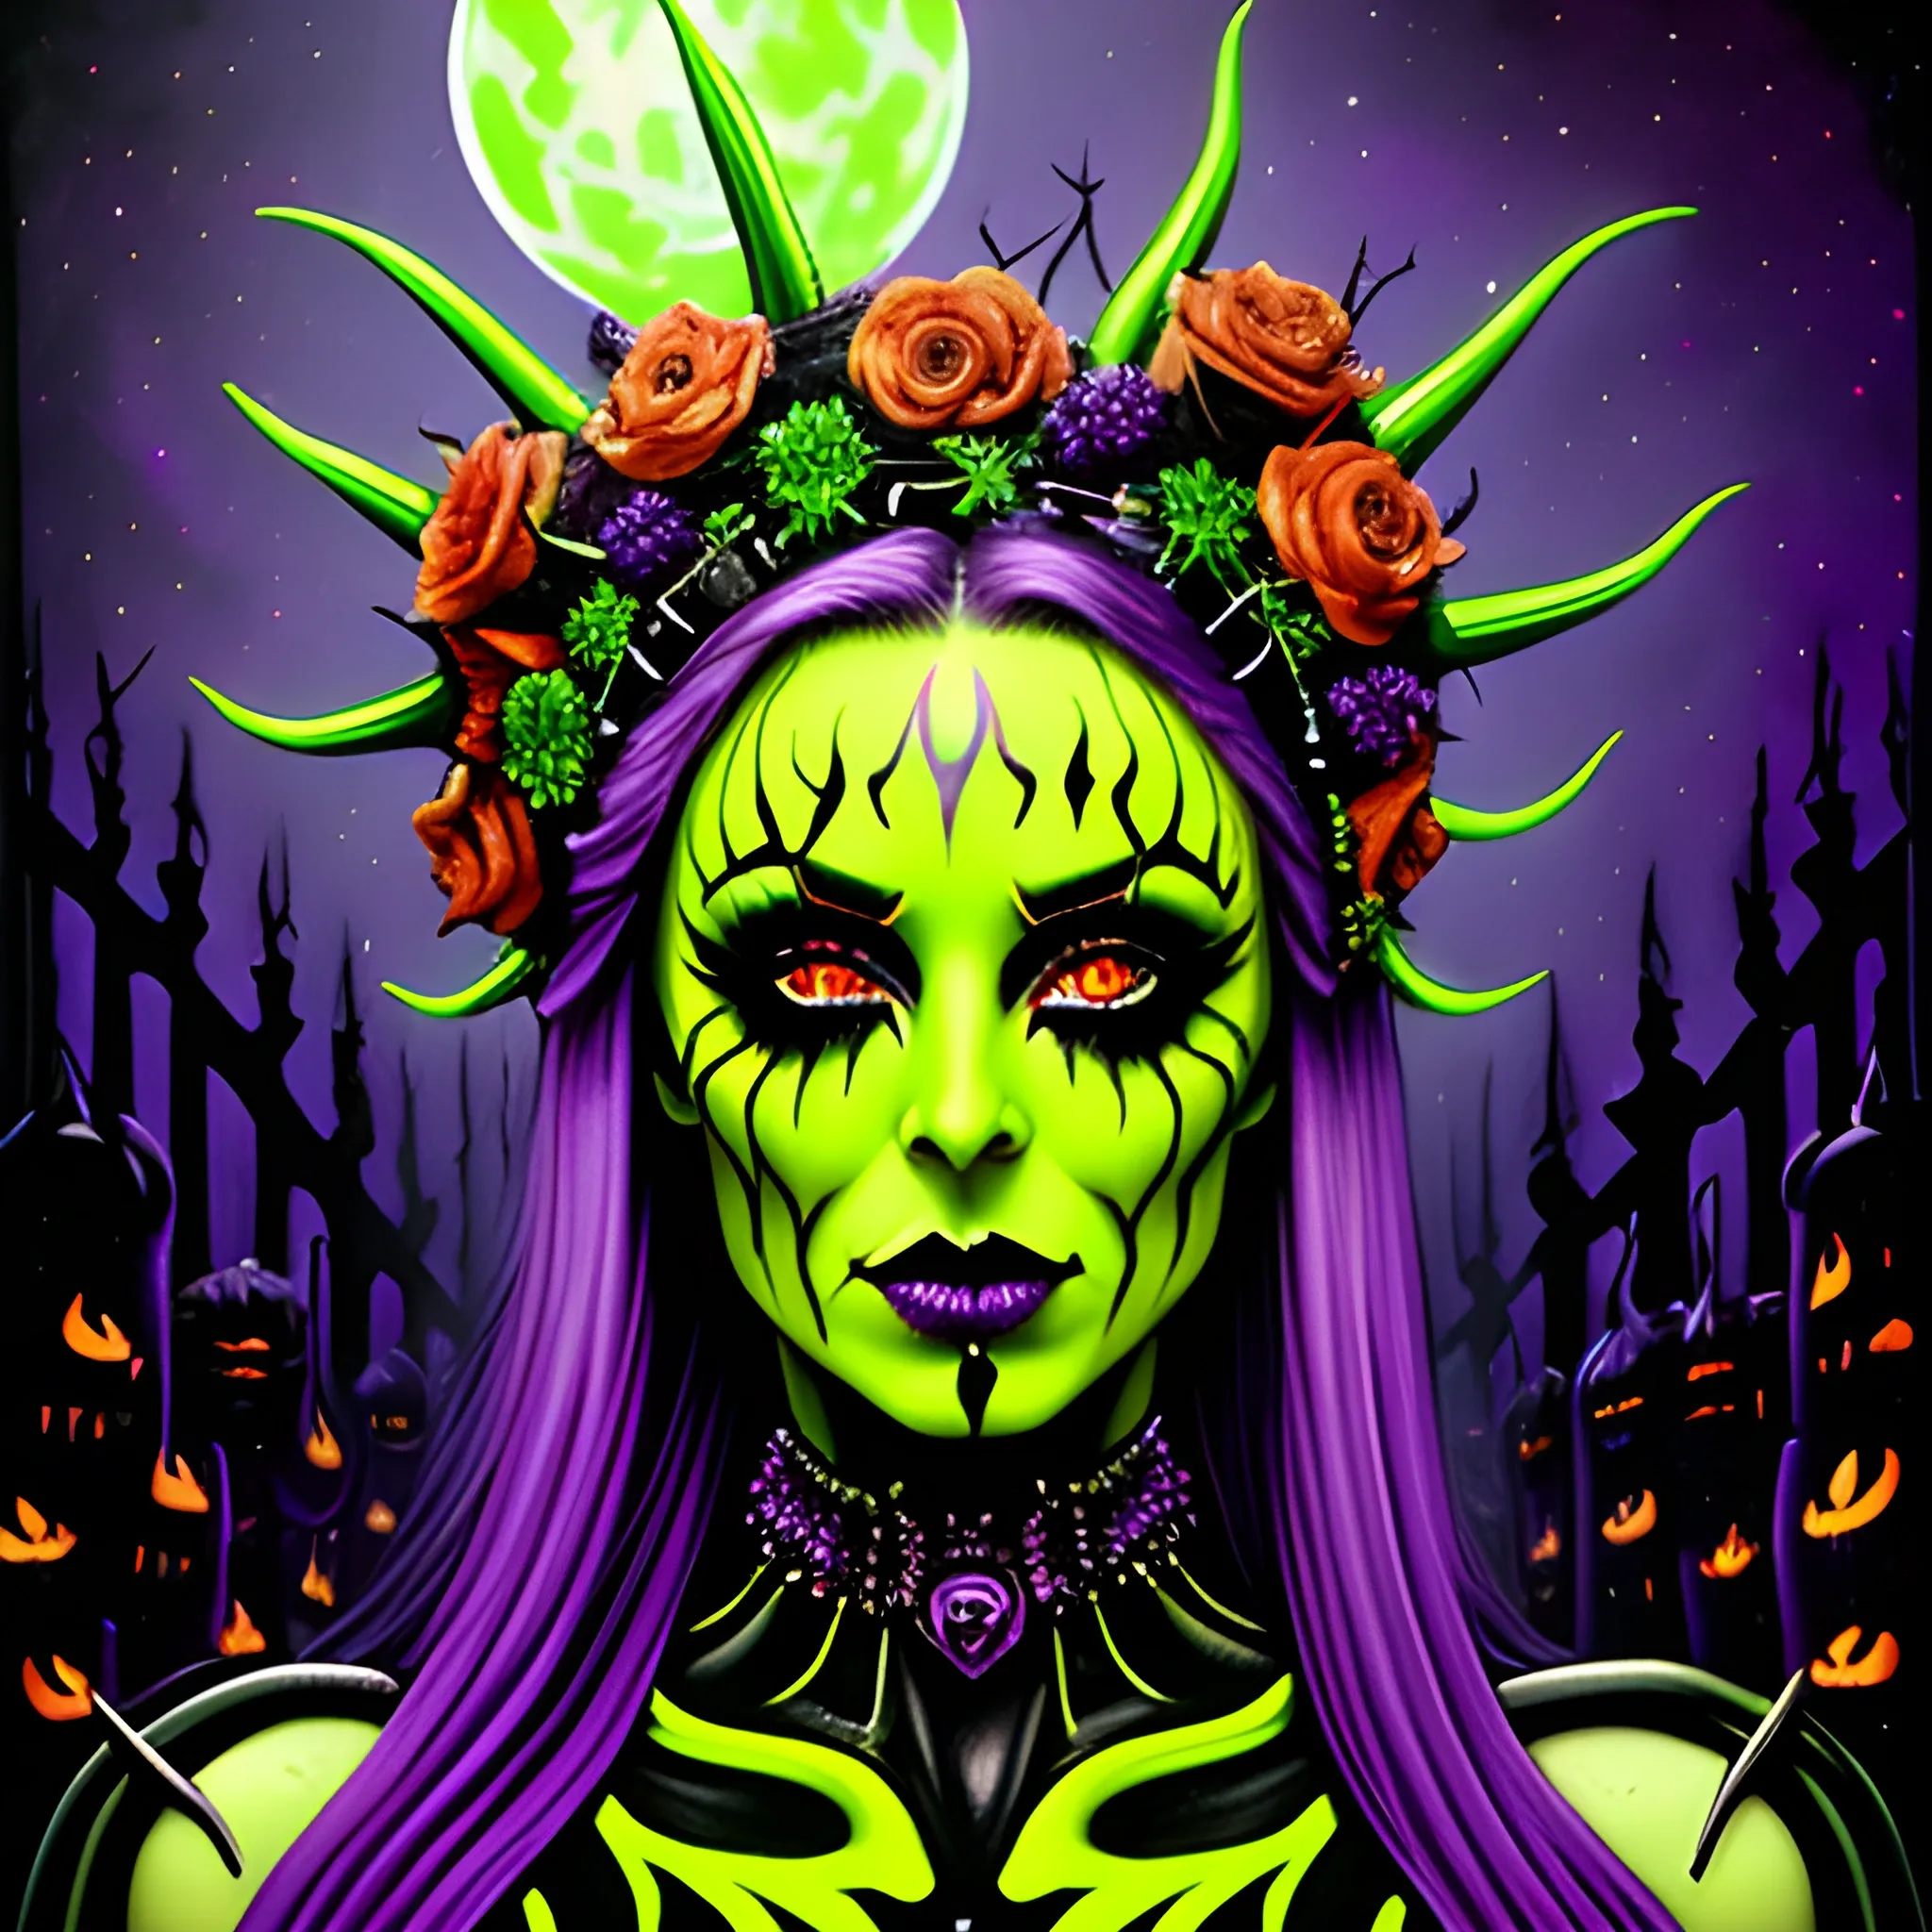 neon grape purple, dayglo orange, chartreuse green, Halloween, a beautiful woman wearing a thorny crown adorned with black roses, tiny green skulls and tiny orange pumpkins, tiny purple pumpkins, bats; Halloween, full moon in a nebula sky, graveyard, neon spray paint, acrylic paint, fantastical surrealist world, in the style of Stephen Gammell and Shawn Coss, extremely detailed, sick, gothic, eldritch, candles; blacklight art